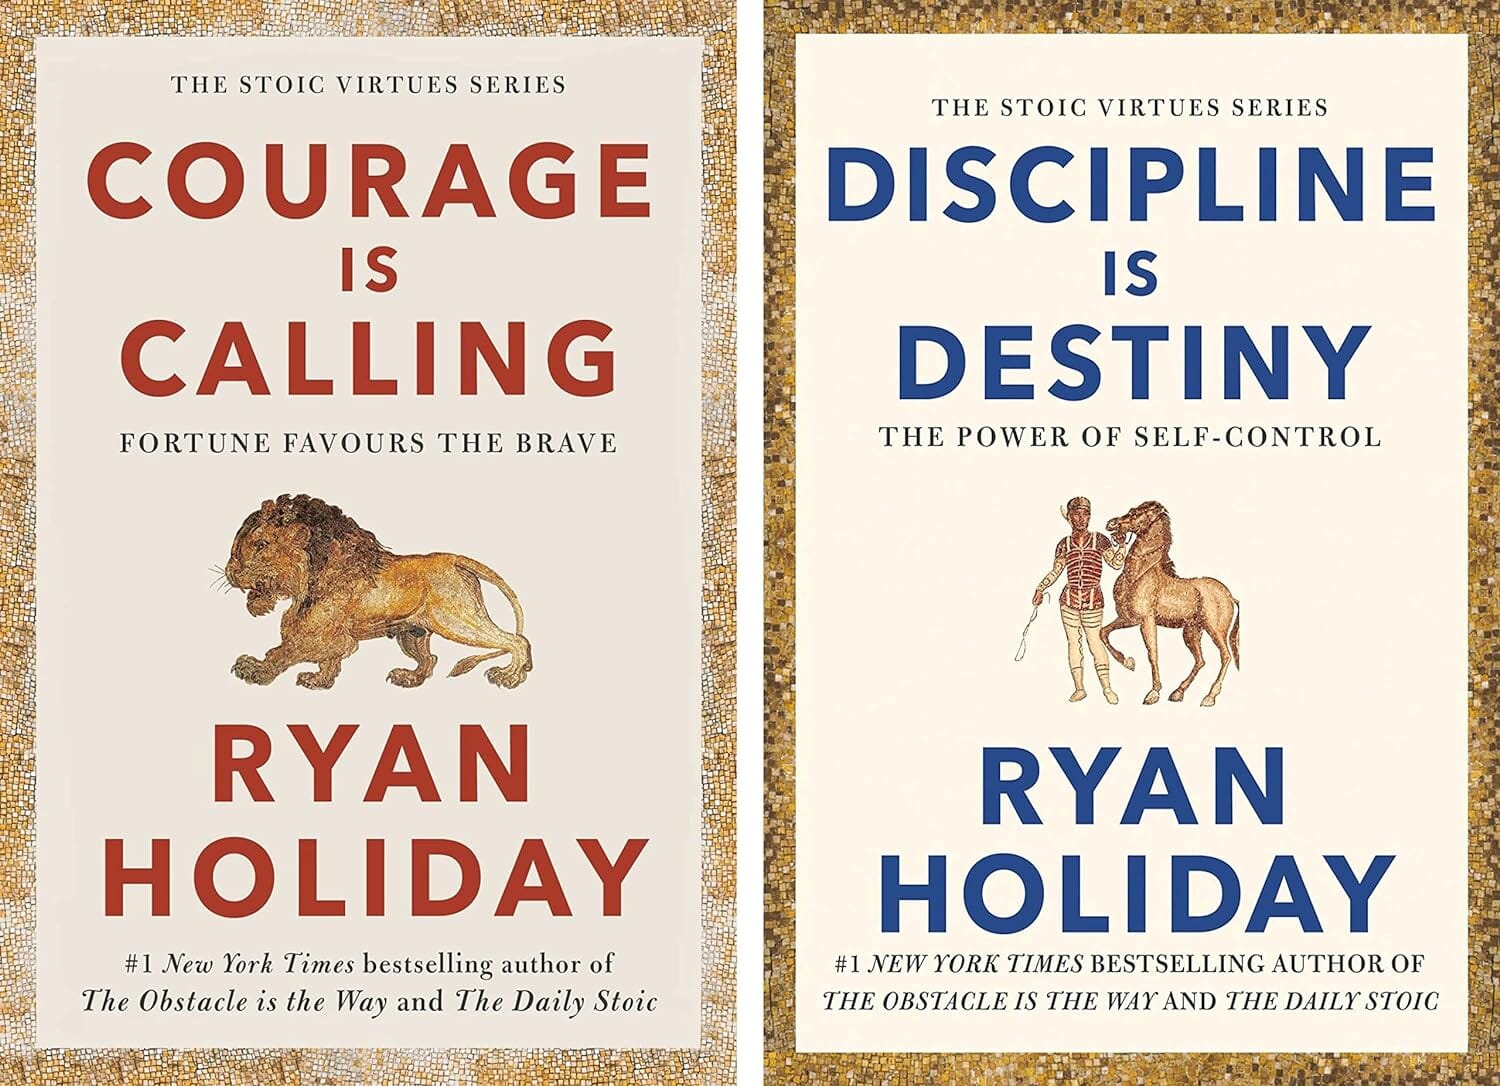 How Fortune Favors the Brave with Ryan Holiday